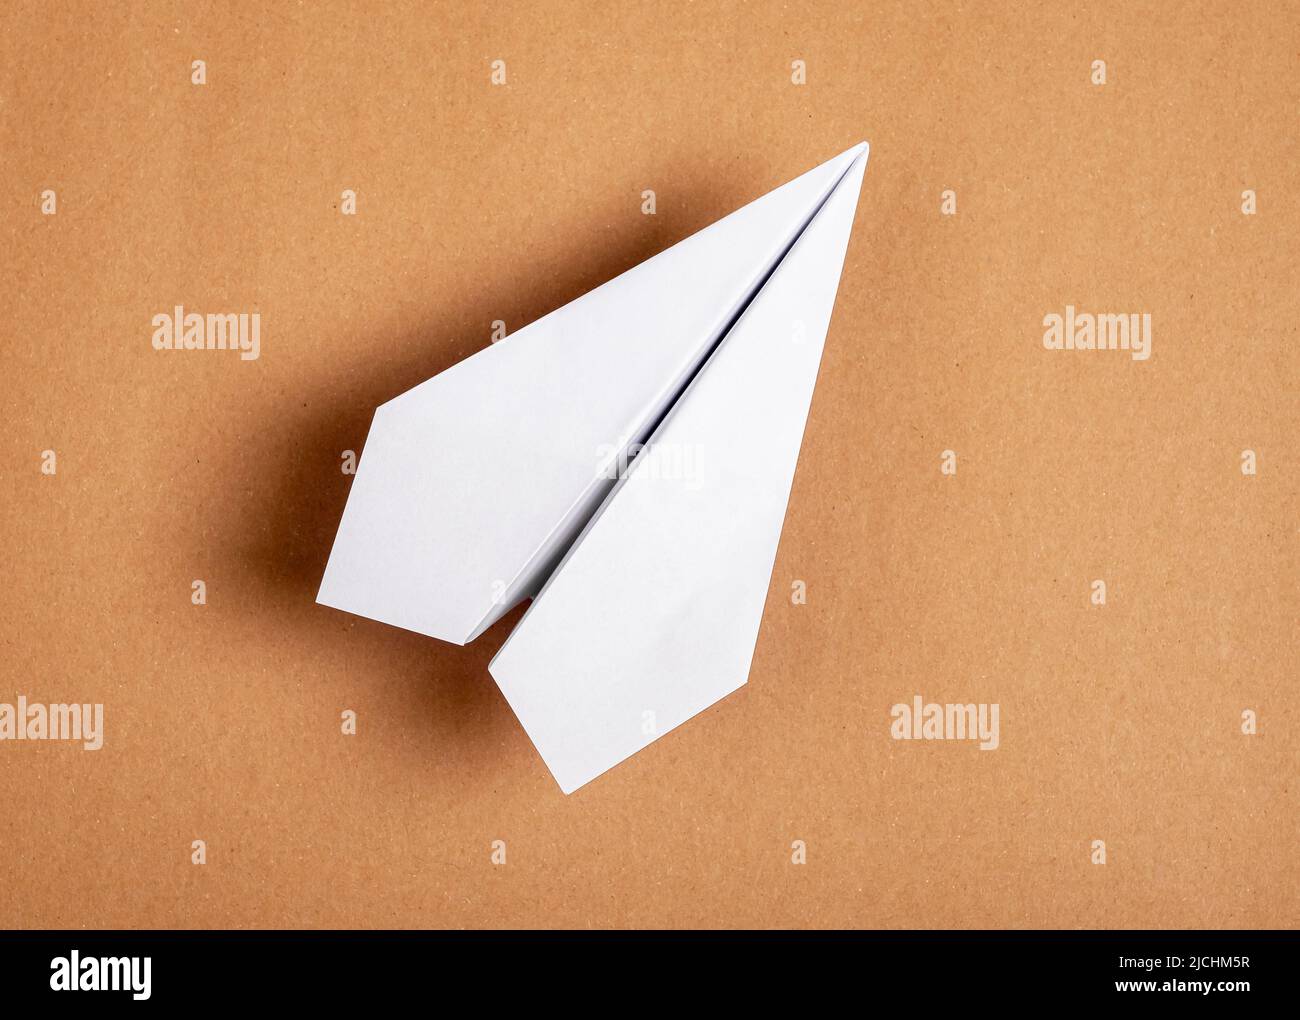 White origami plane on brown background. Paper folding art. Architecture model. High quality photo Stock Photo